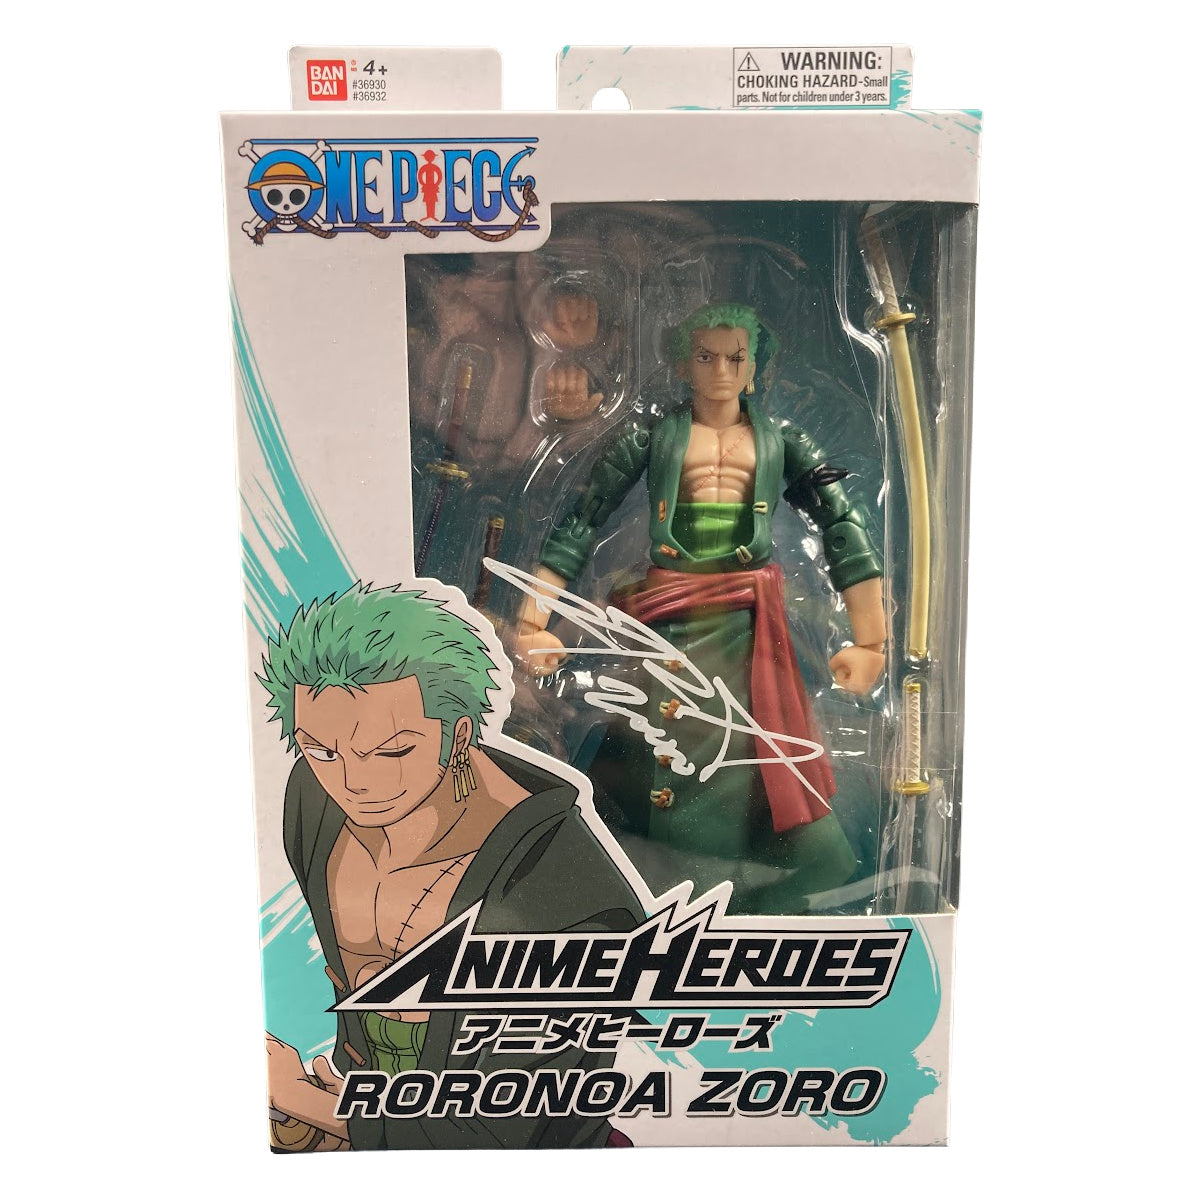 Christopher Sabat Signed One Piece Action Figure Anime Heroes One Piece Zoro JSA